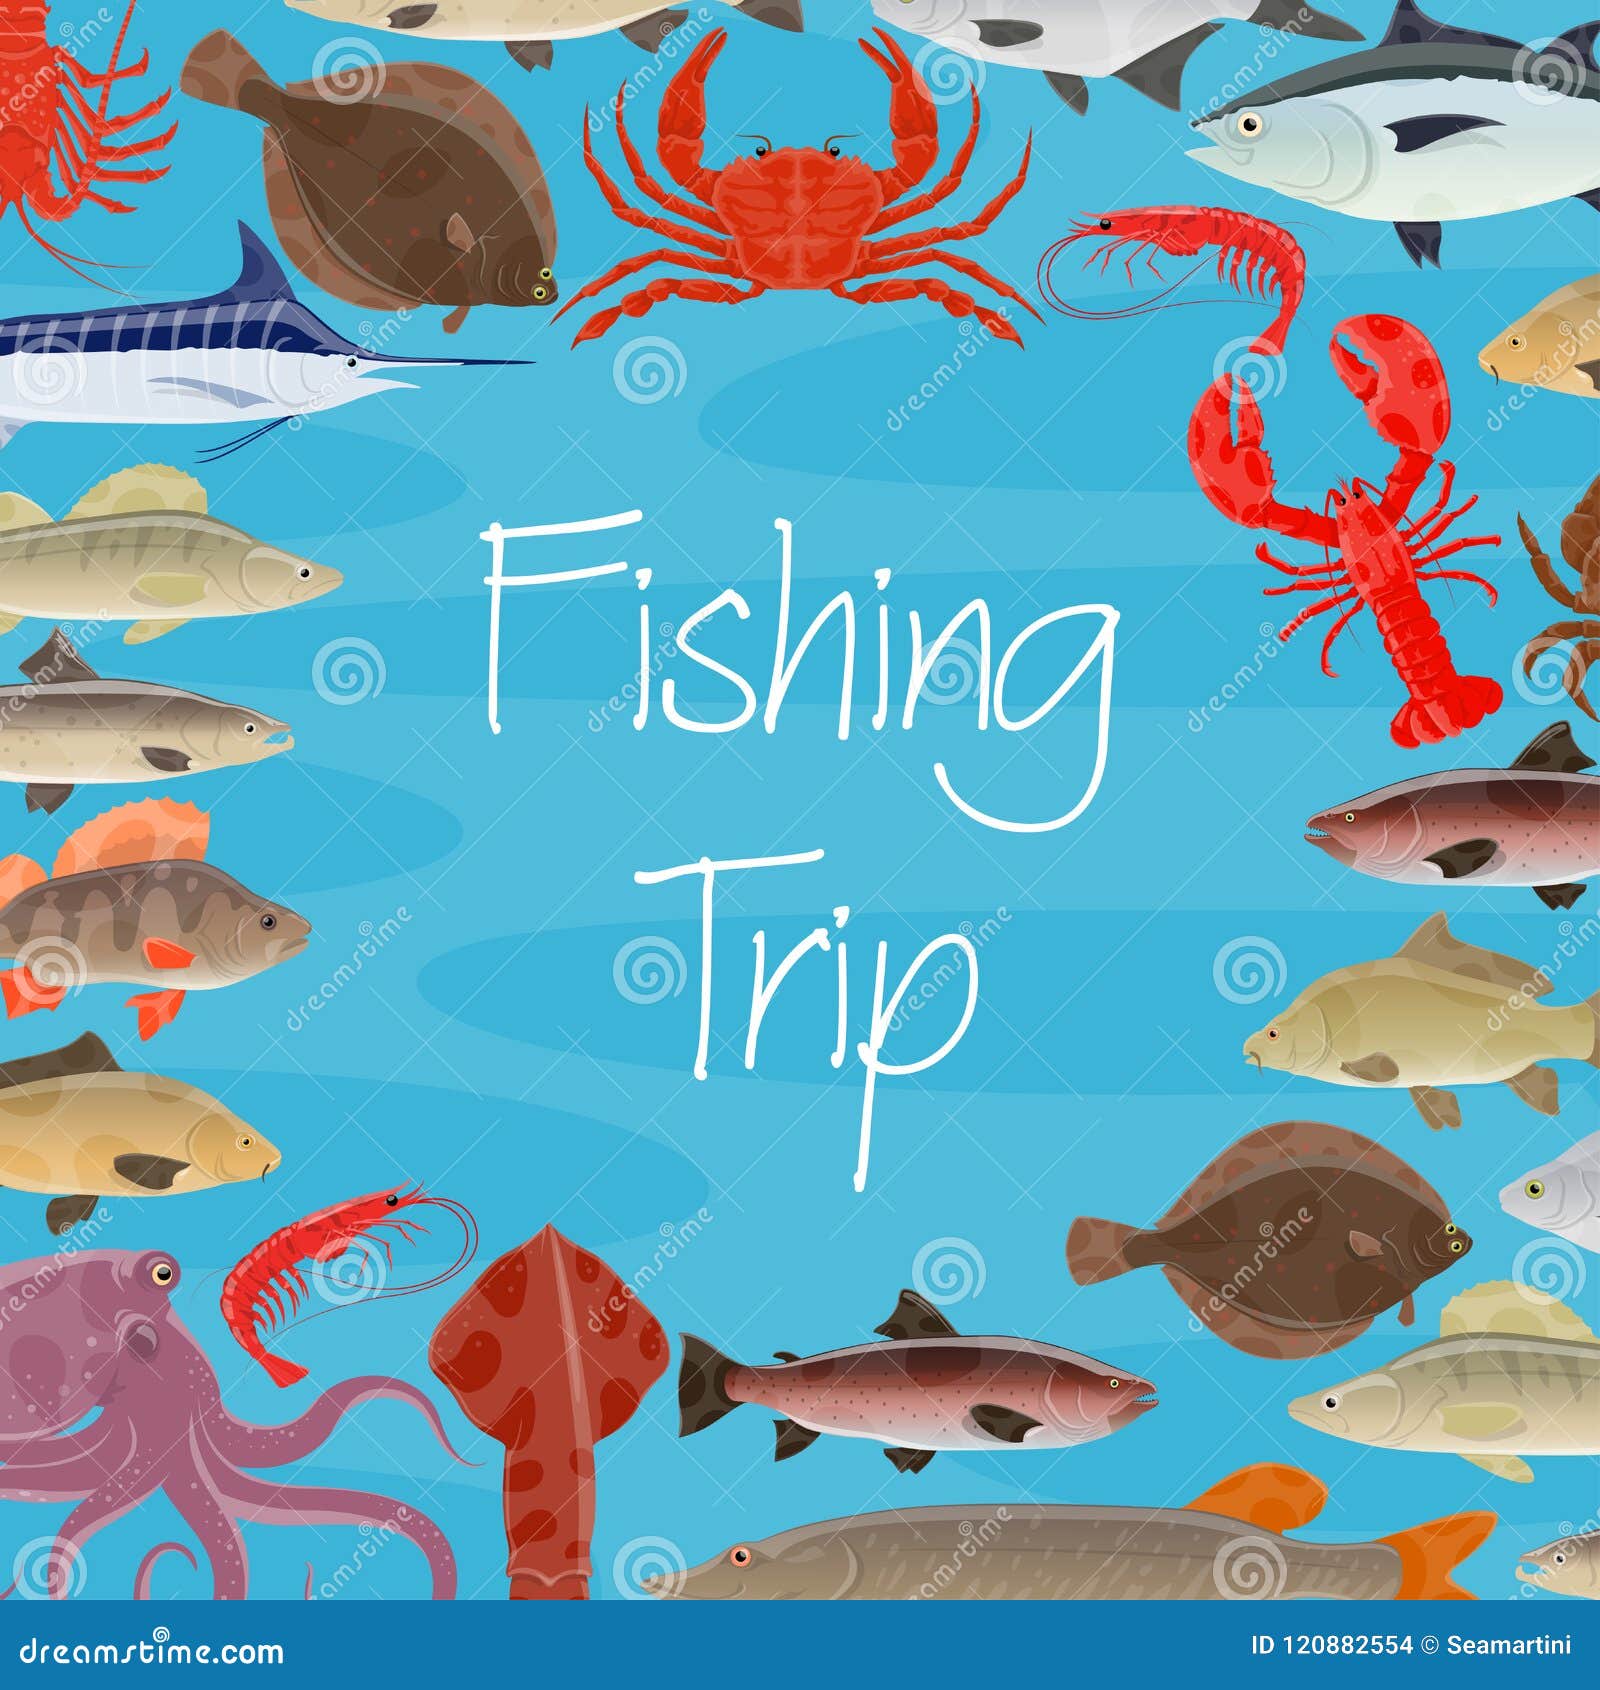 Download Vector Poster For Fishing Trip And Seafood Fish Stock Vector - Illustration of flounder, fauna ...